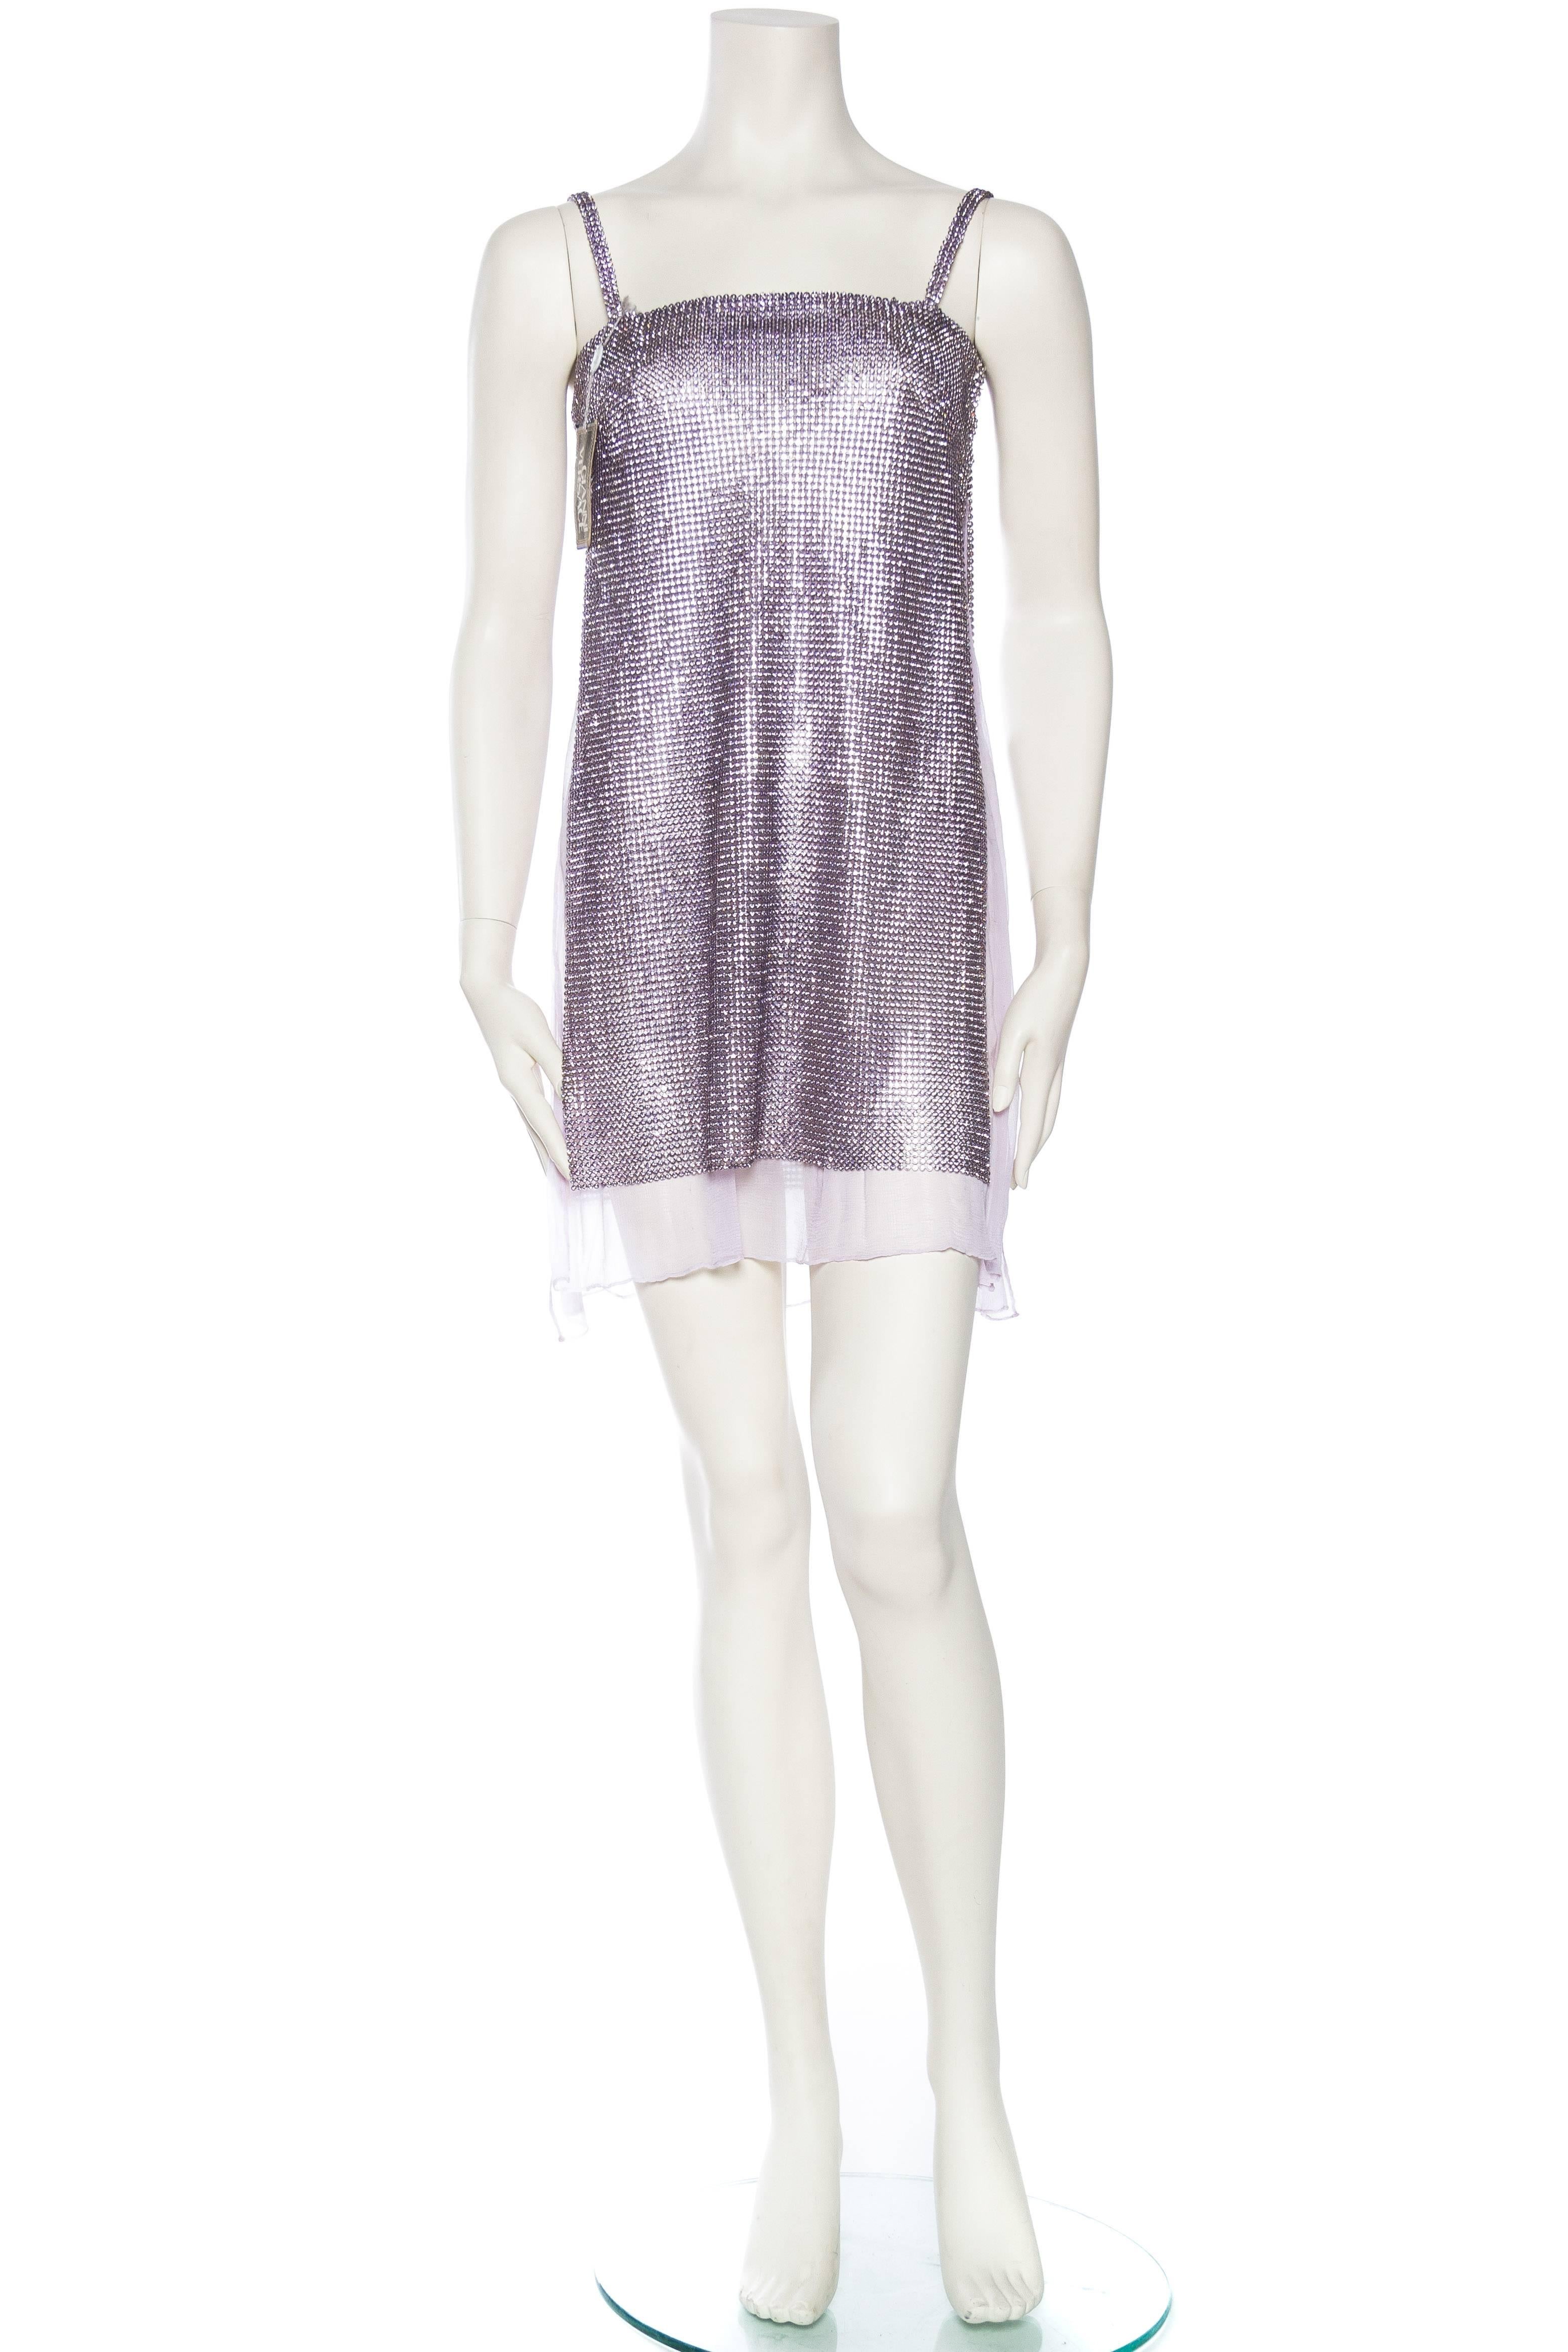 1990S GIANNI VERSACE Lilac Silk Chiffon & Crystal Metal Mesh Cocktail Dress With Full Side Slits